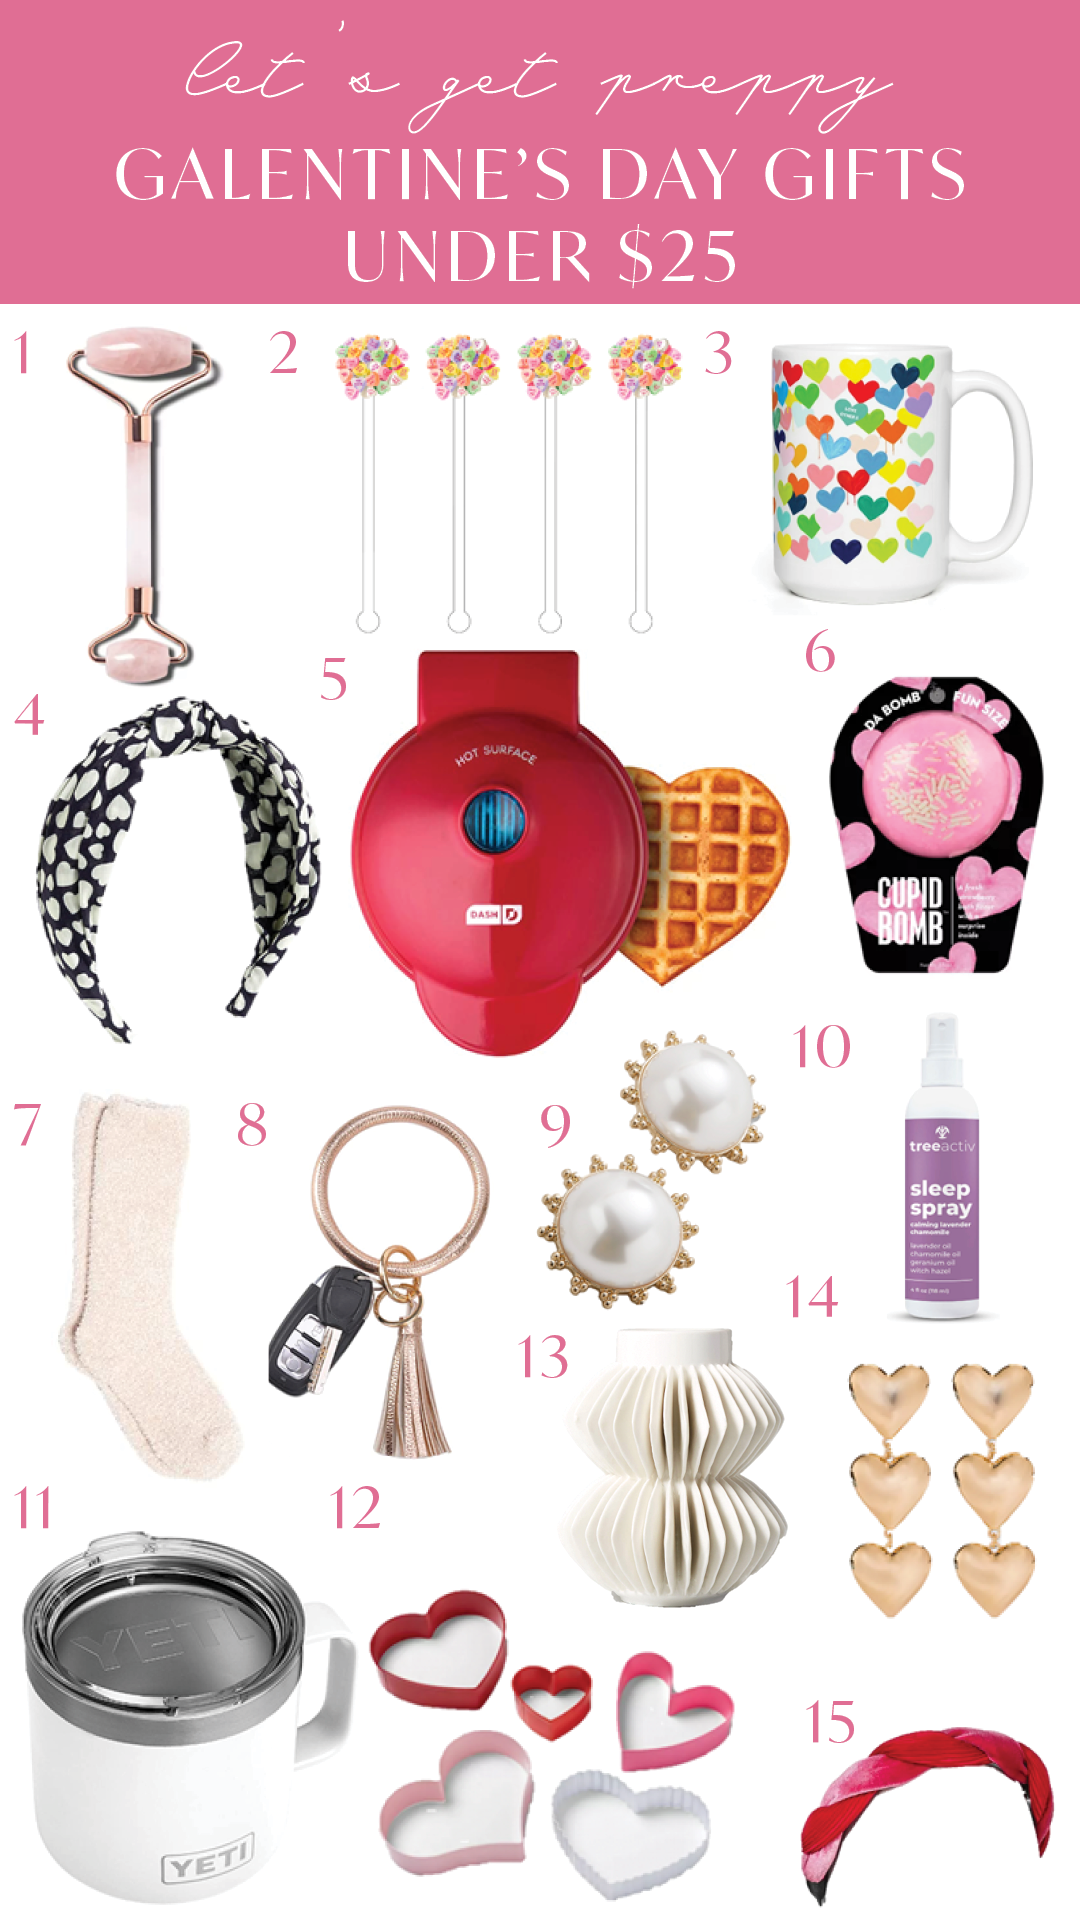 Galentine's Day Gift Guide Under $25